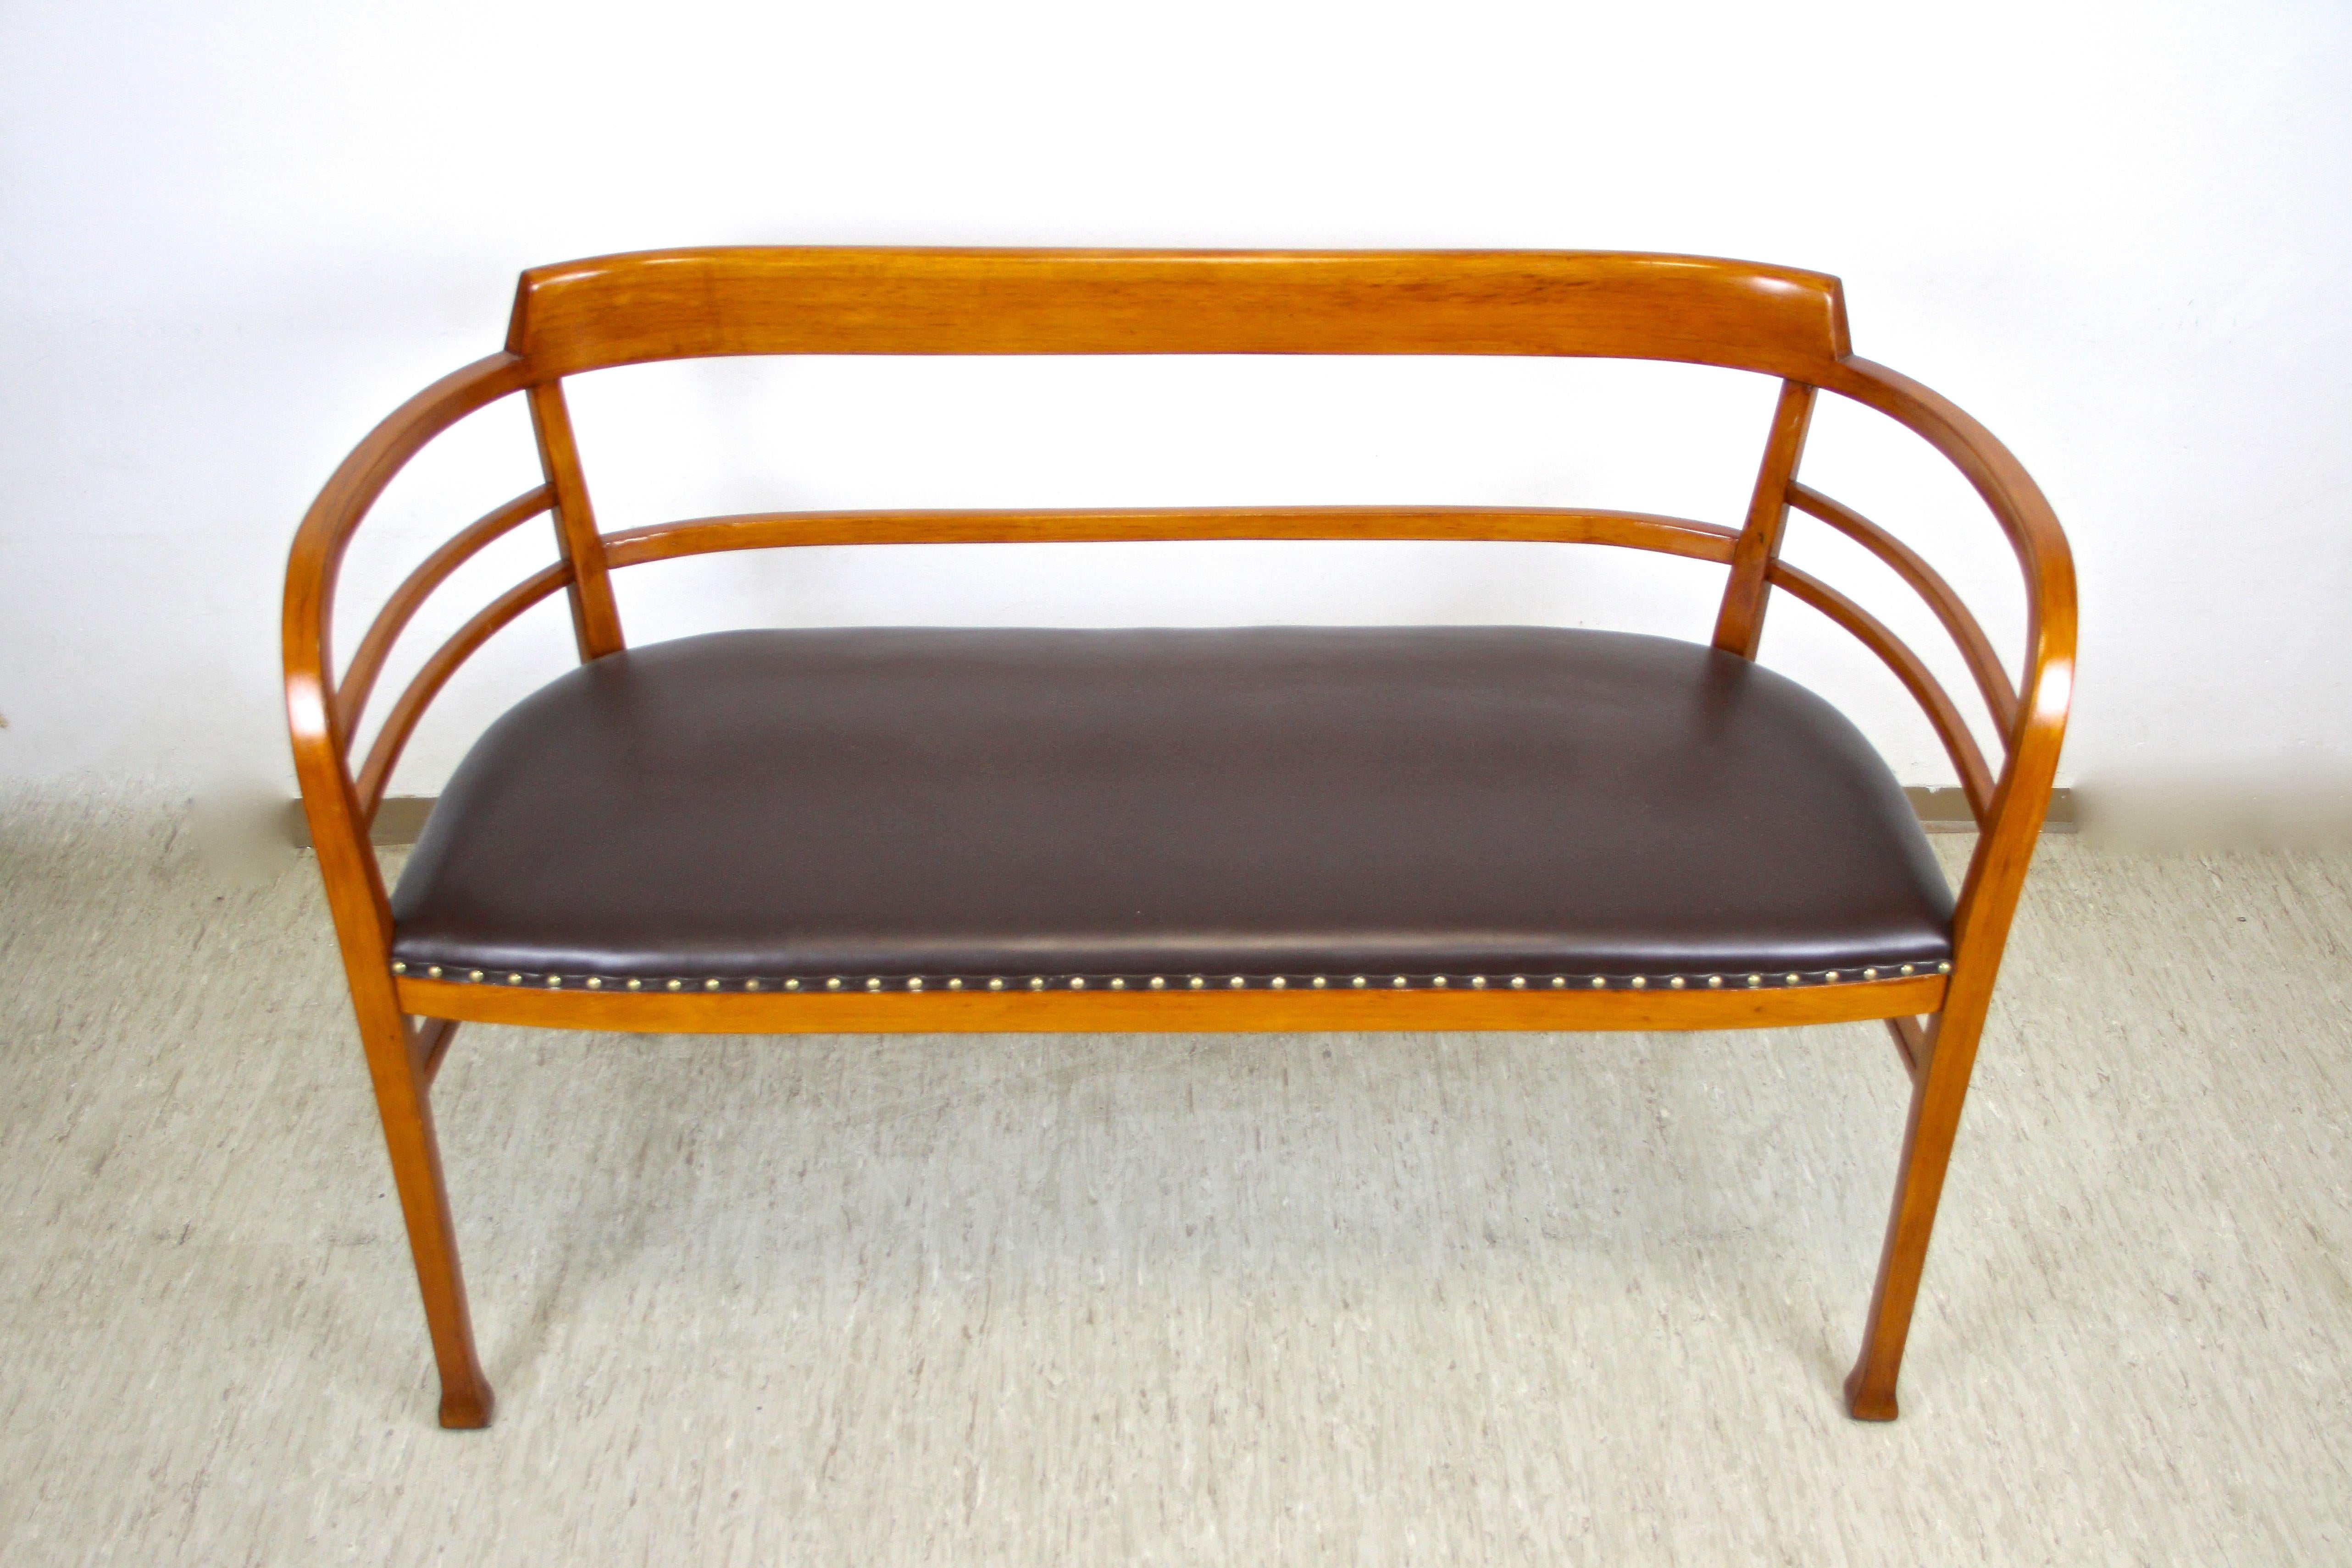 Timeless bentwood bench from the renown company of Thonet in Vienna/ Austria, circa 1905. Showing a fantastic design attributed to the famous Austrian designer Otto Wagner, this Art Nouveau bentwood bench comes with a newly upholstered seating